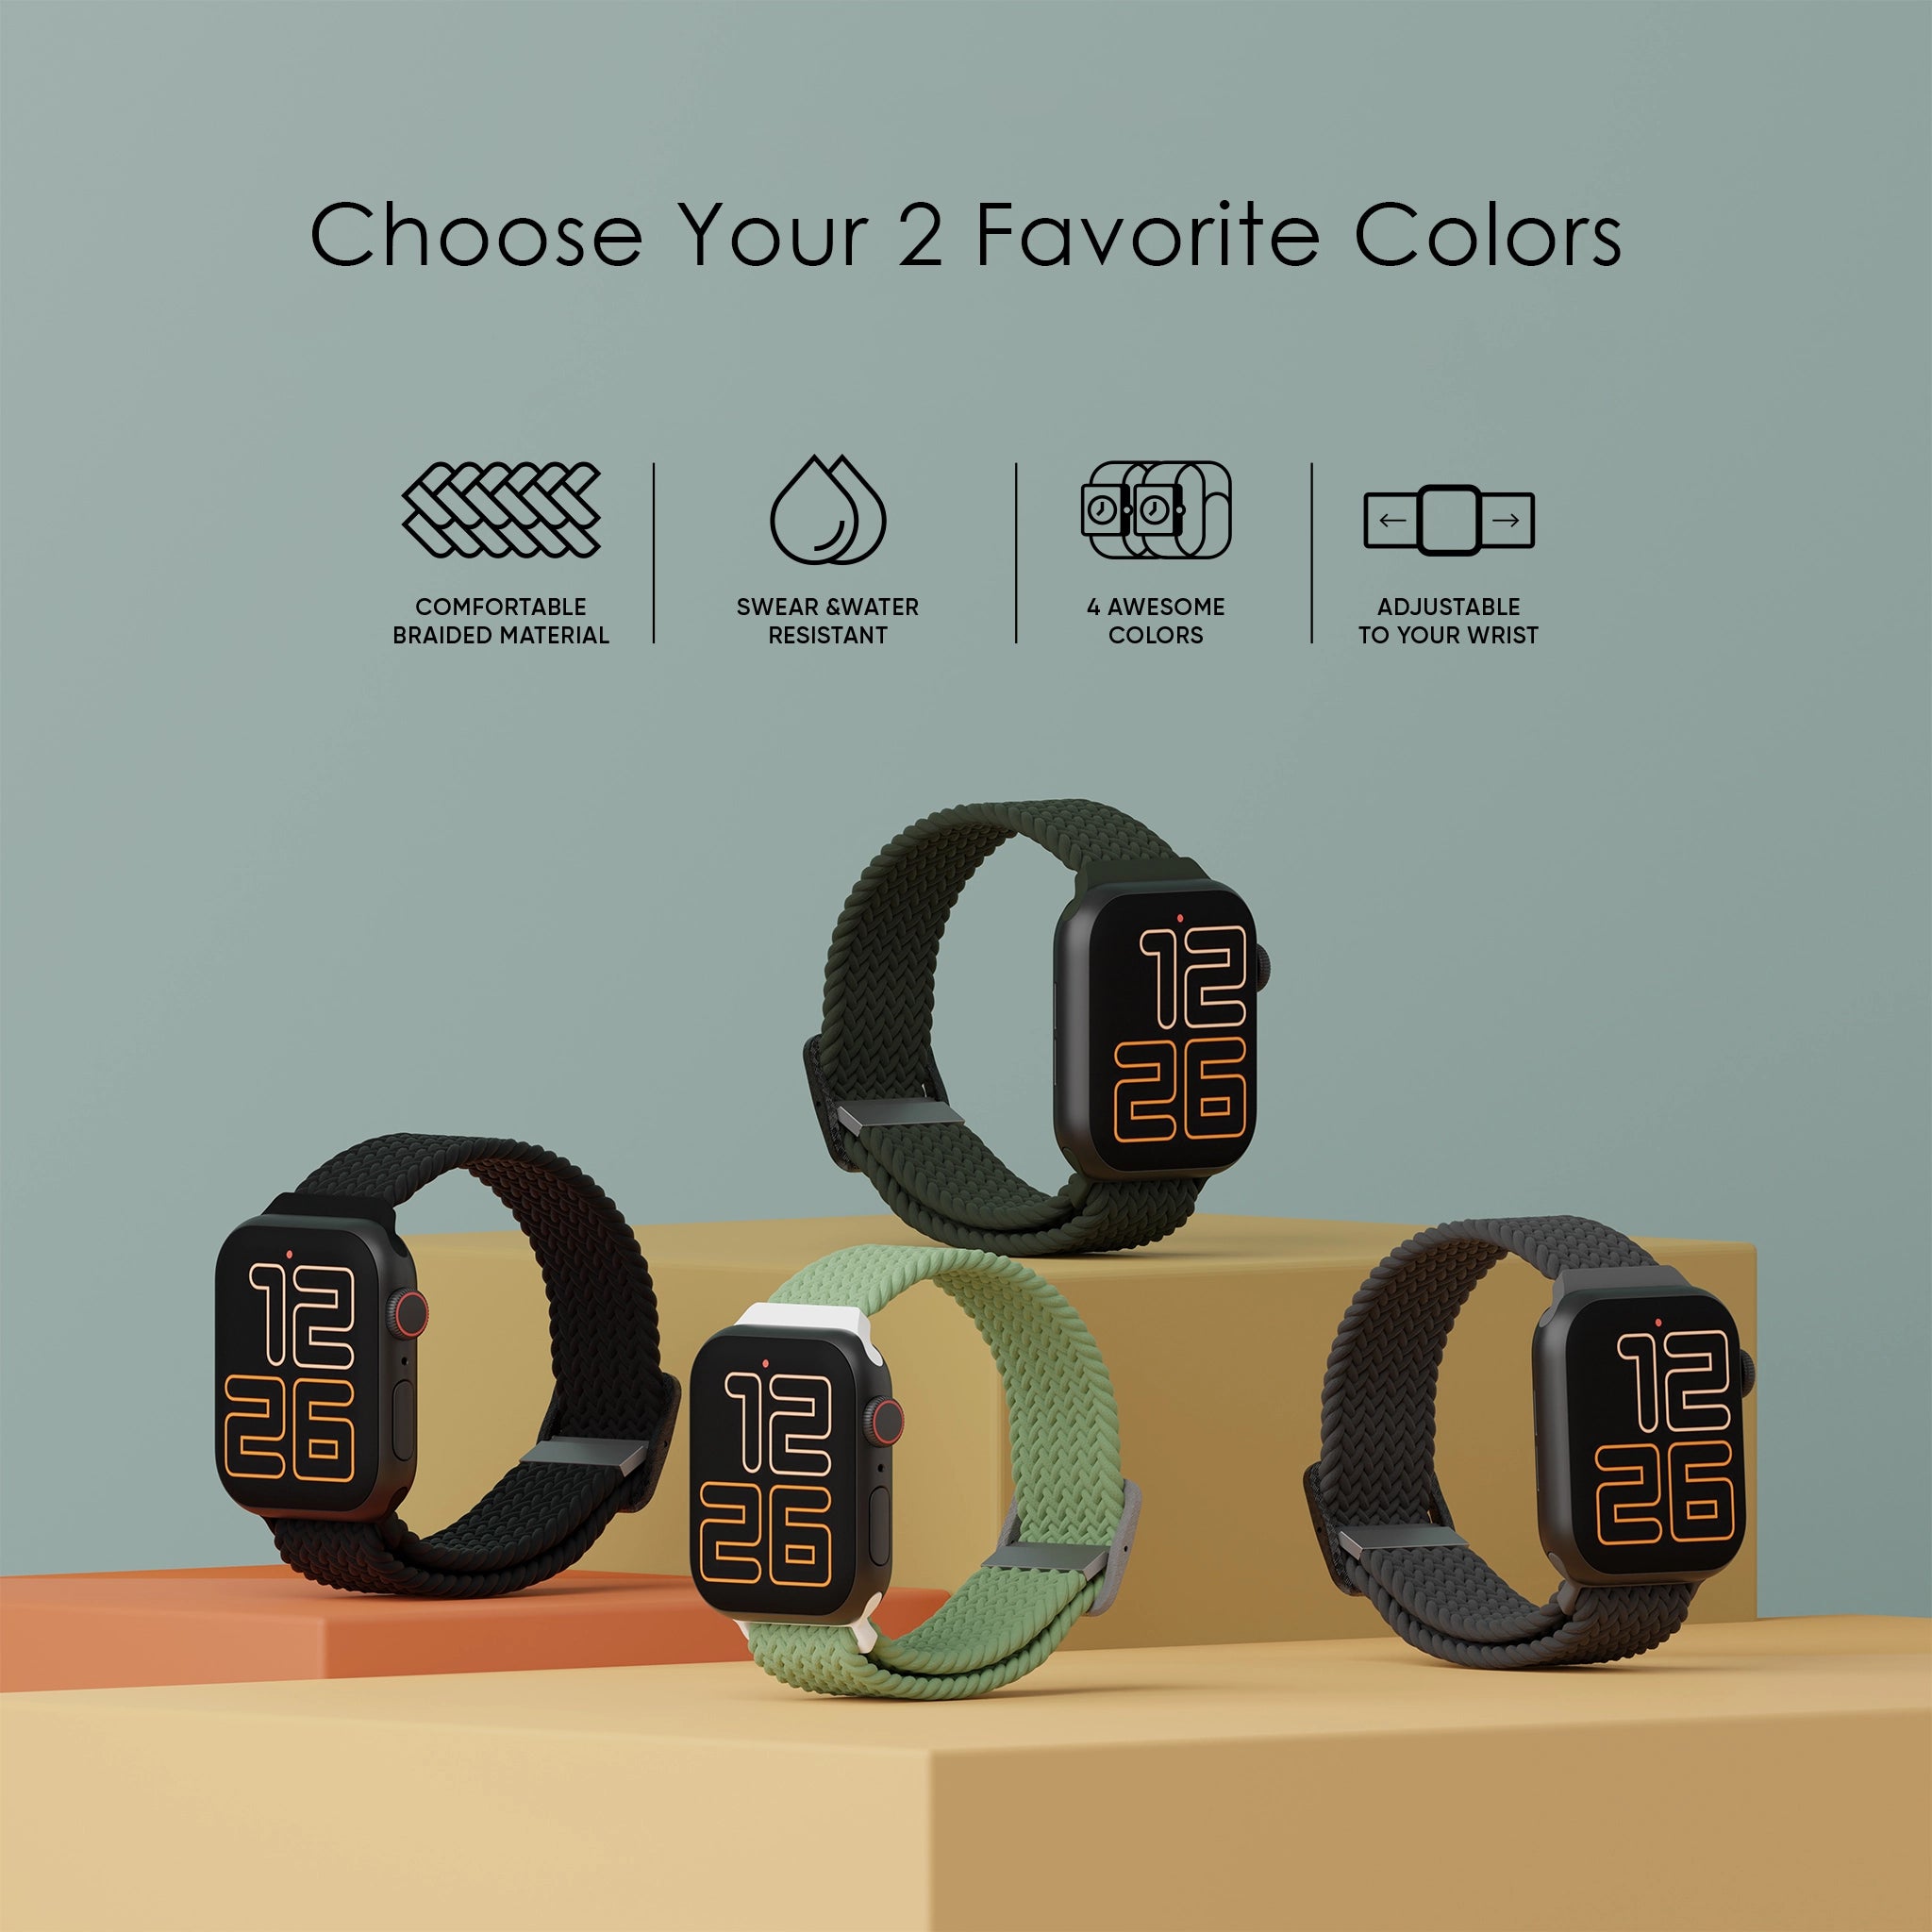 Assortment of smartwatches with braided straps in multiple colors showcasing comfort and water resistance."